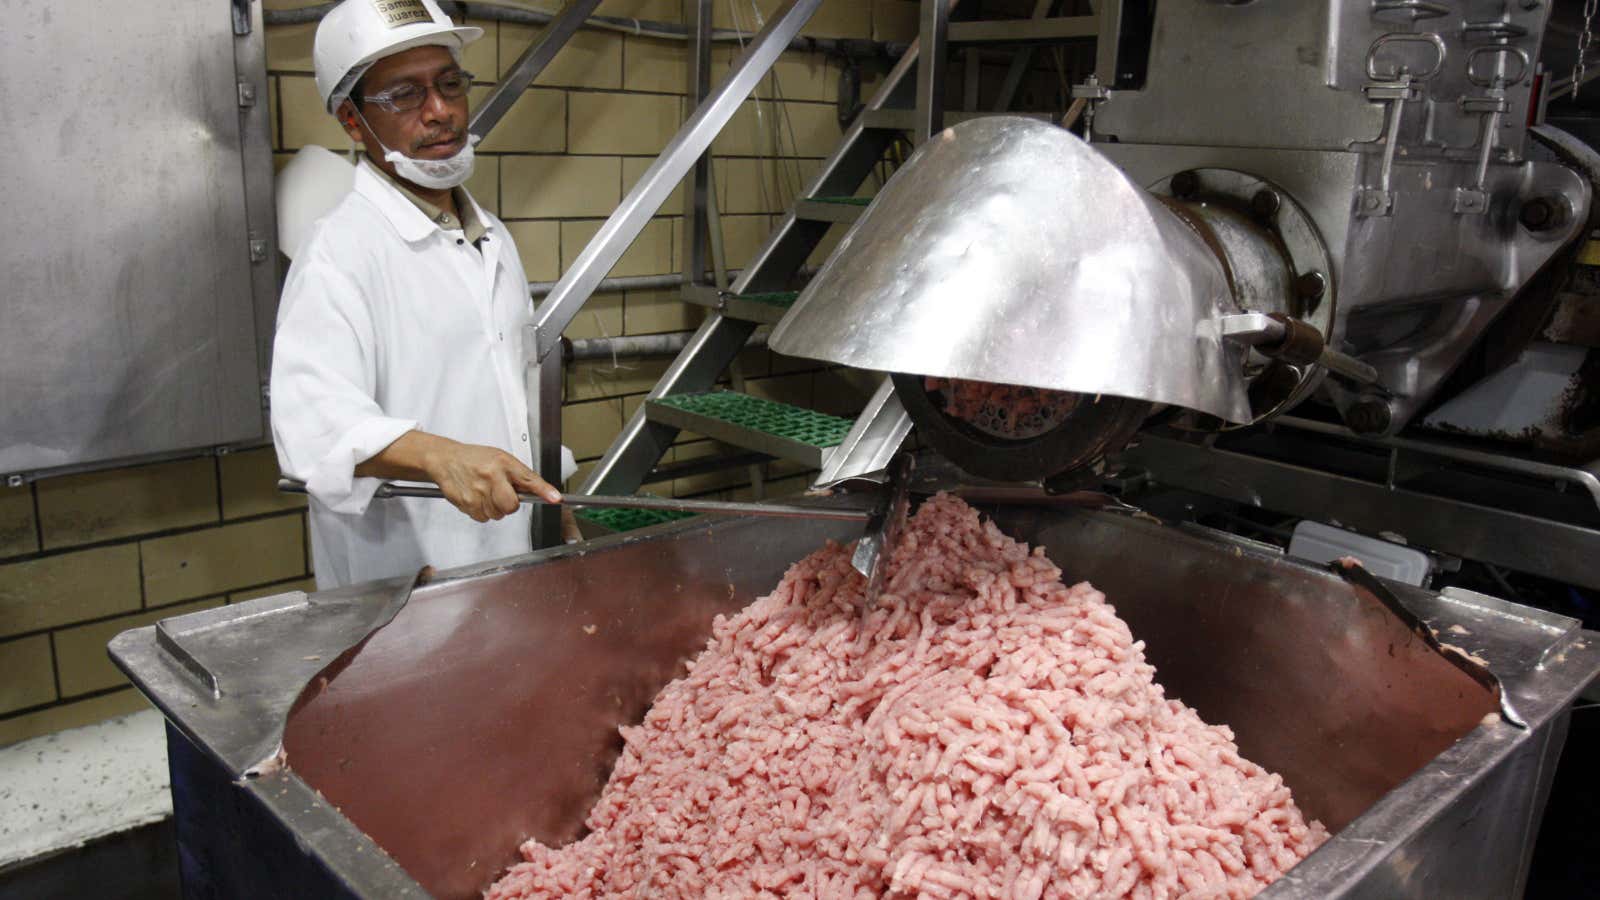 Workers at meat processing plants across the US have been particularly vulnerable to Covid-19